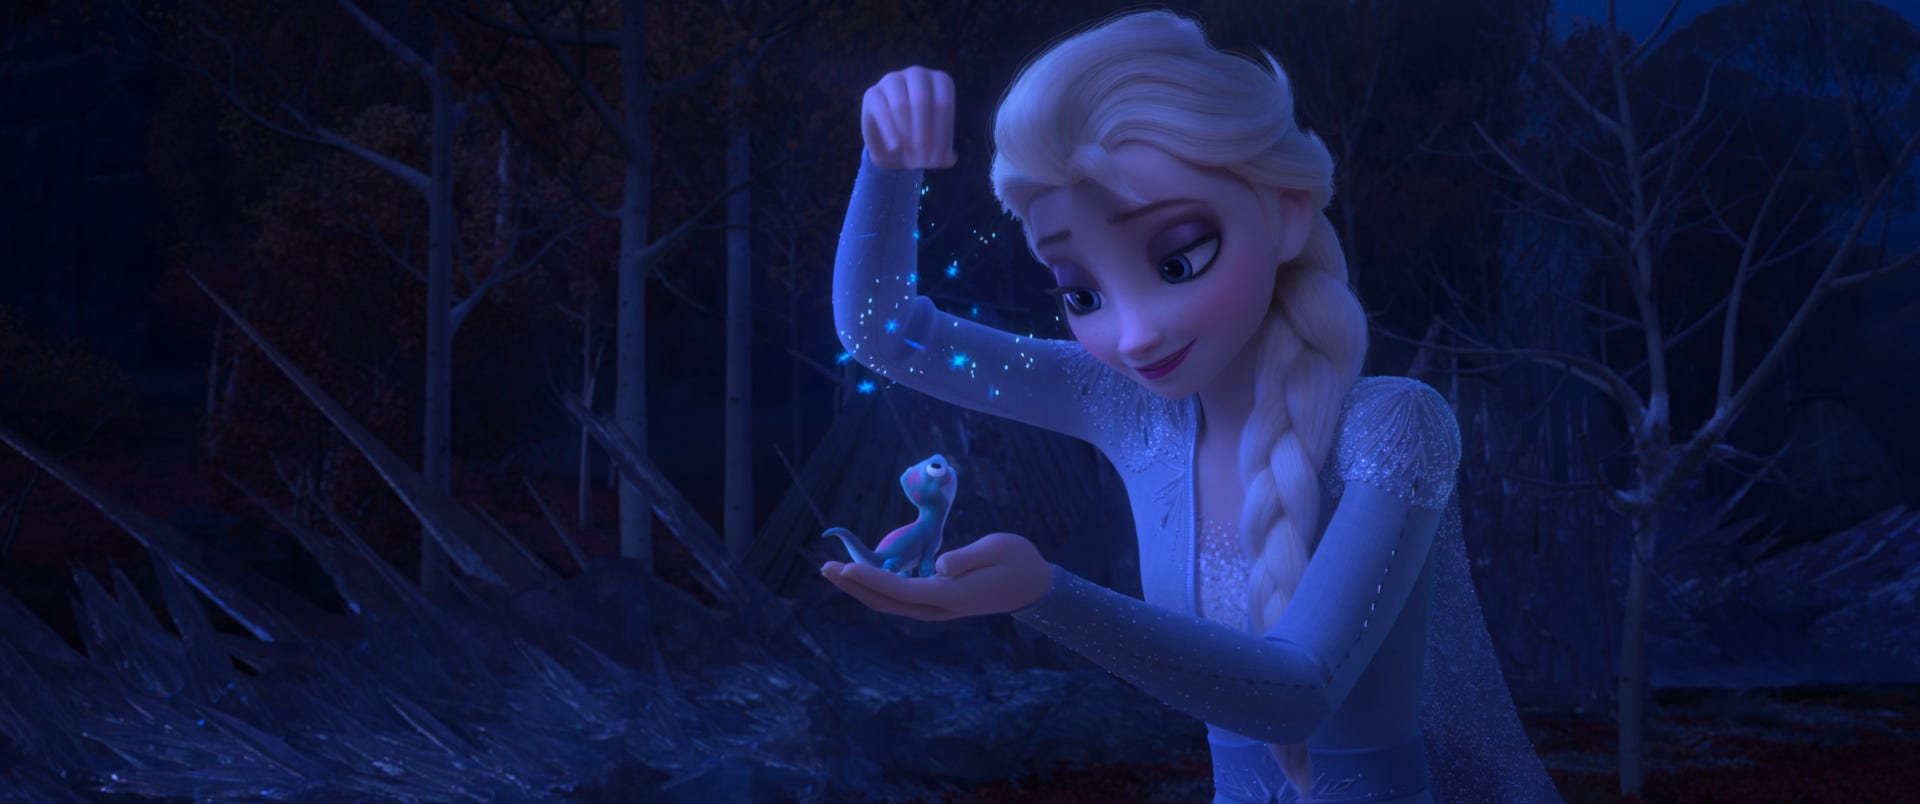 Frozen 2': Anna, Elsa, Kristoff and Olaf face existential crises